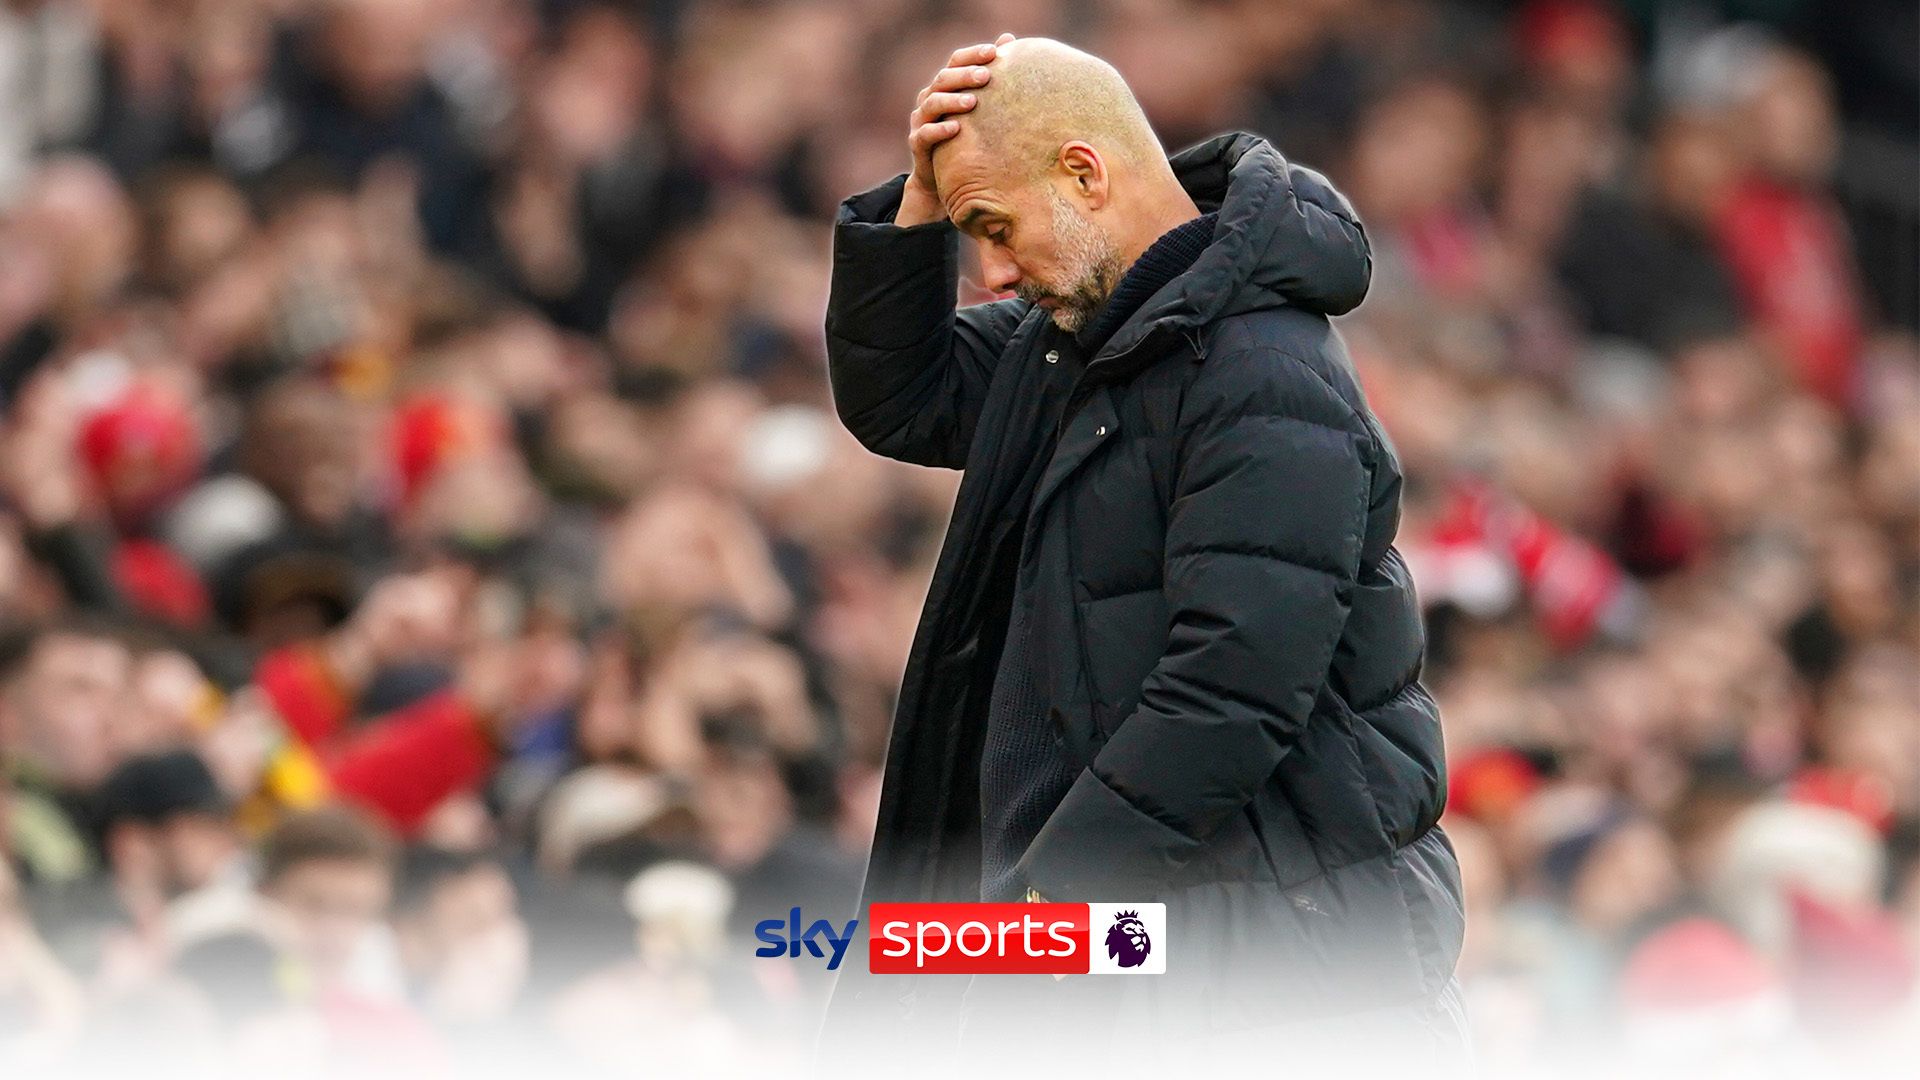 May 2022: Guardiola - I'd walk away if the club lied to me